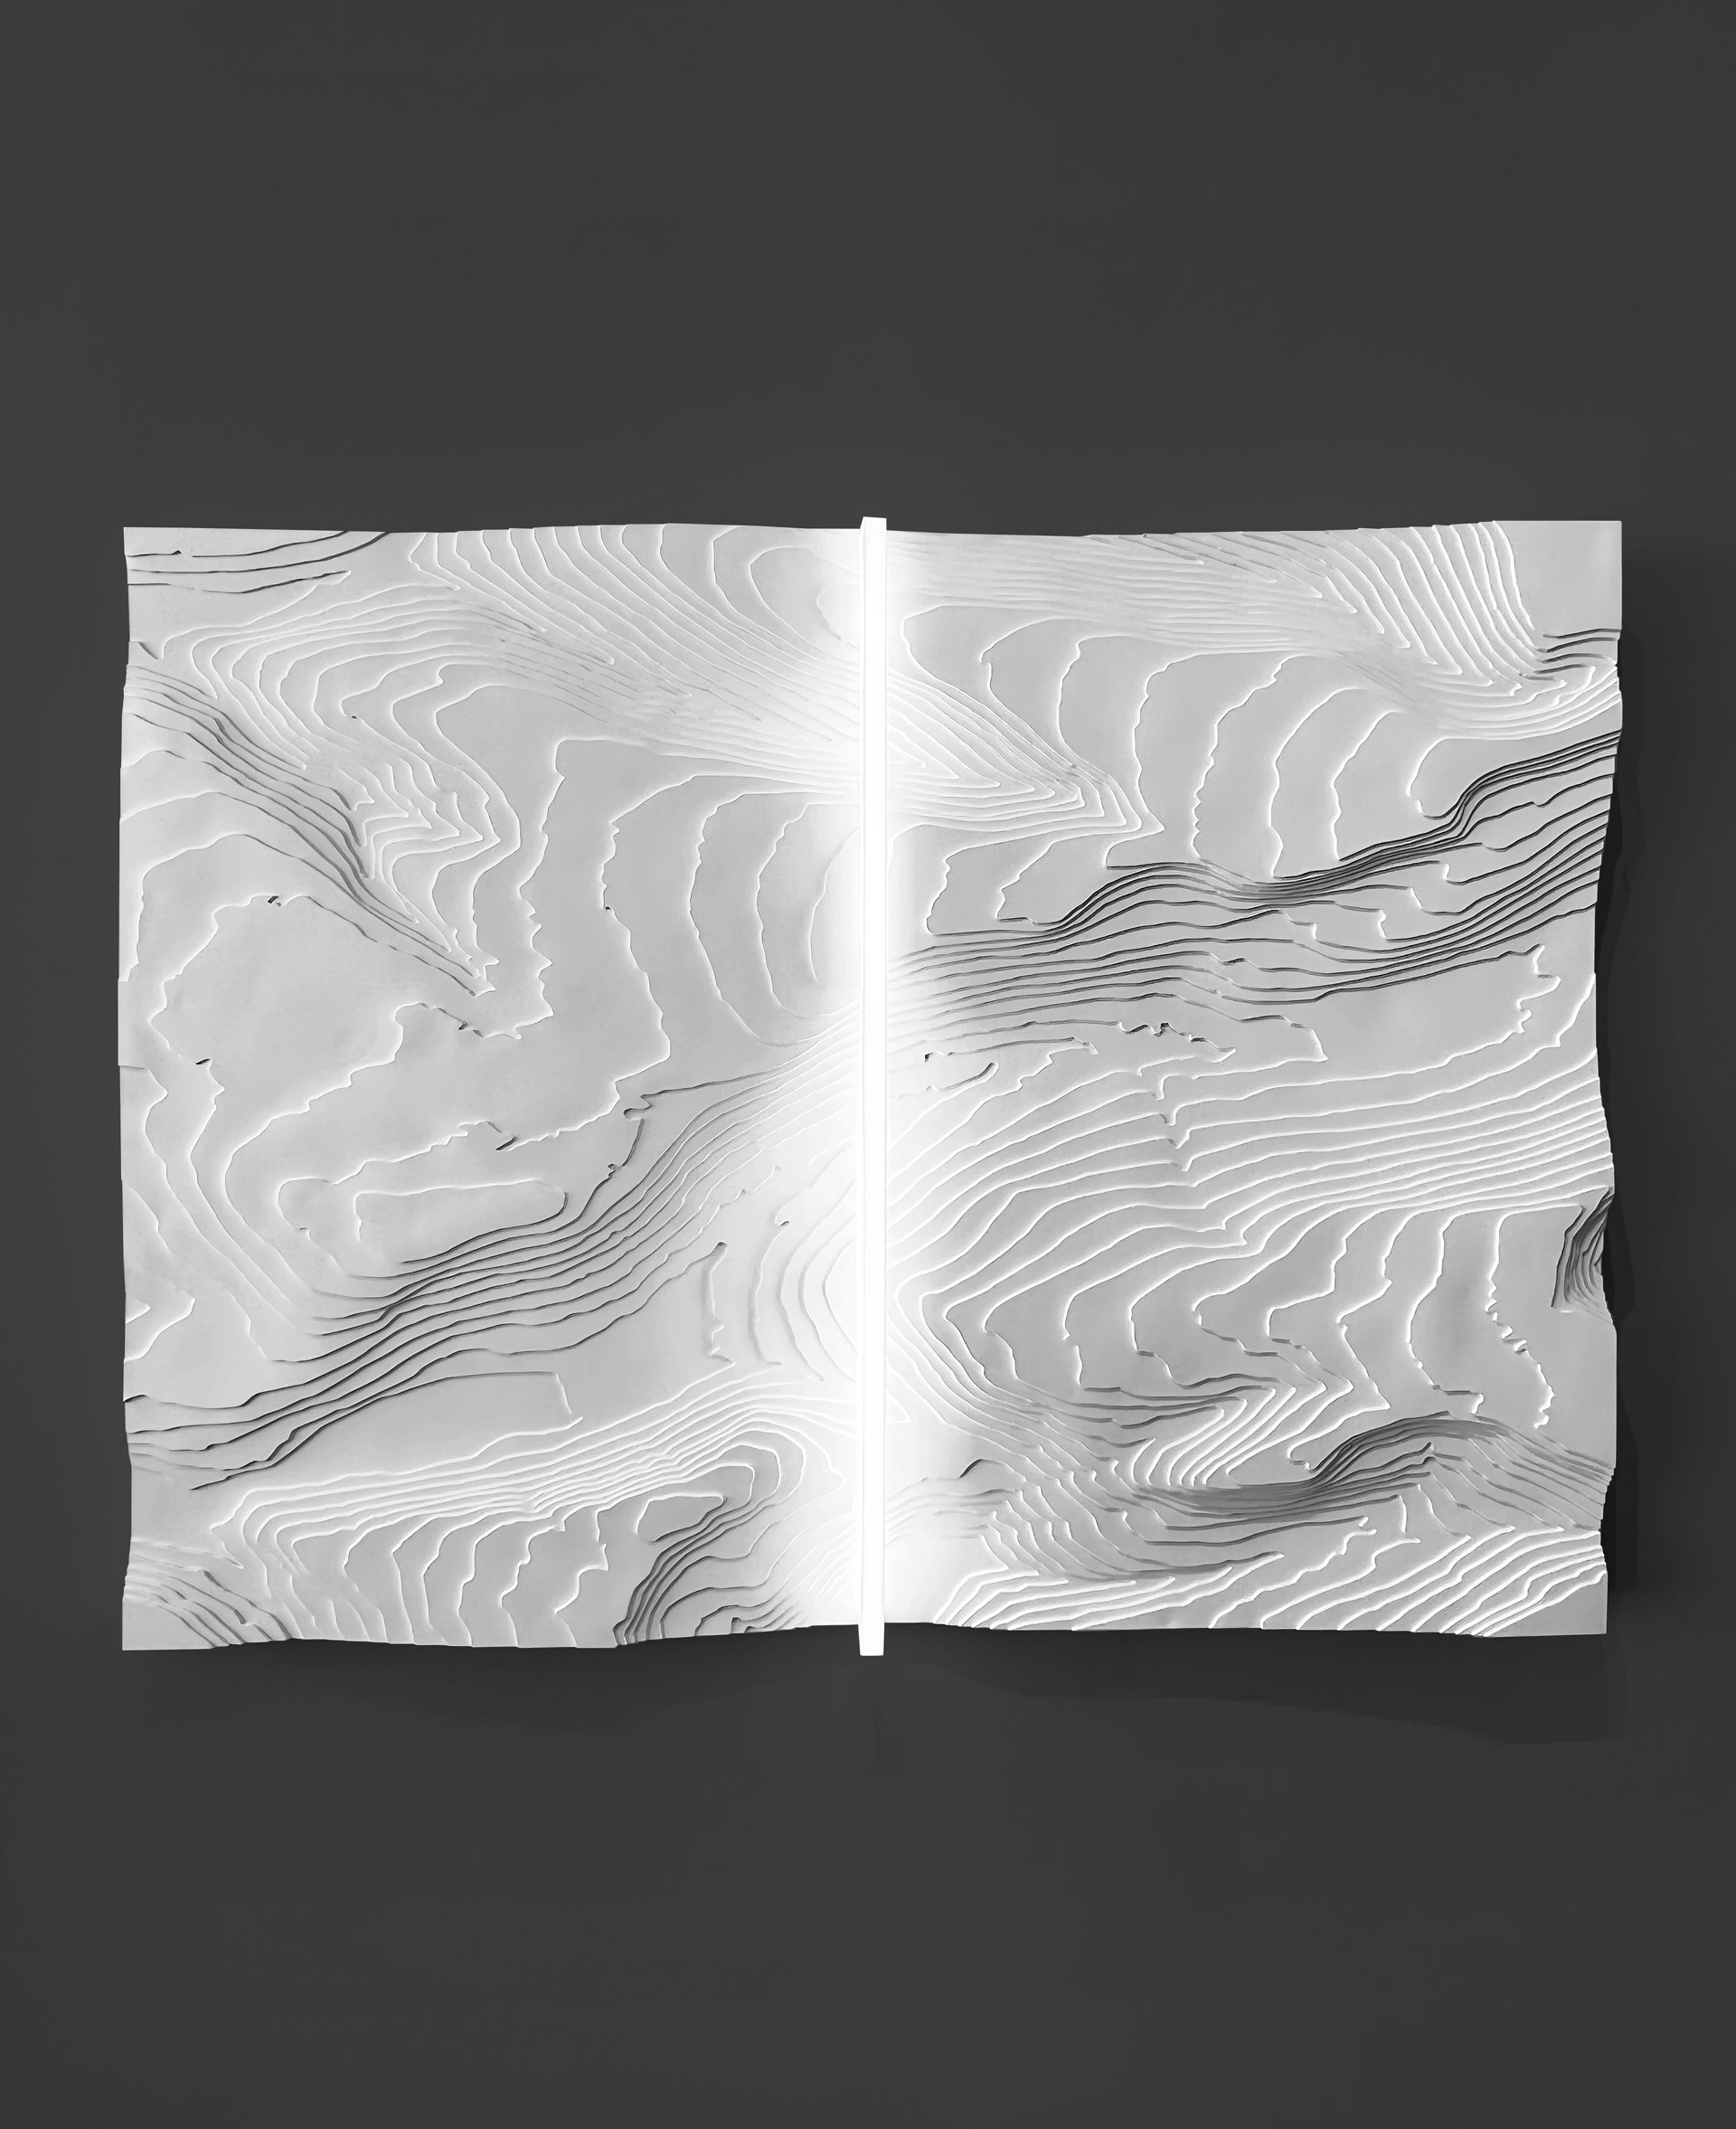 Topographies by Mareo Rodriguez